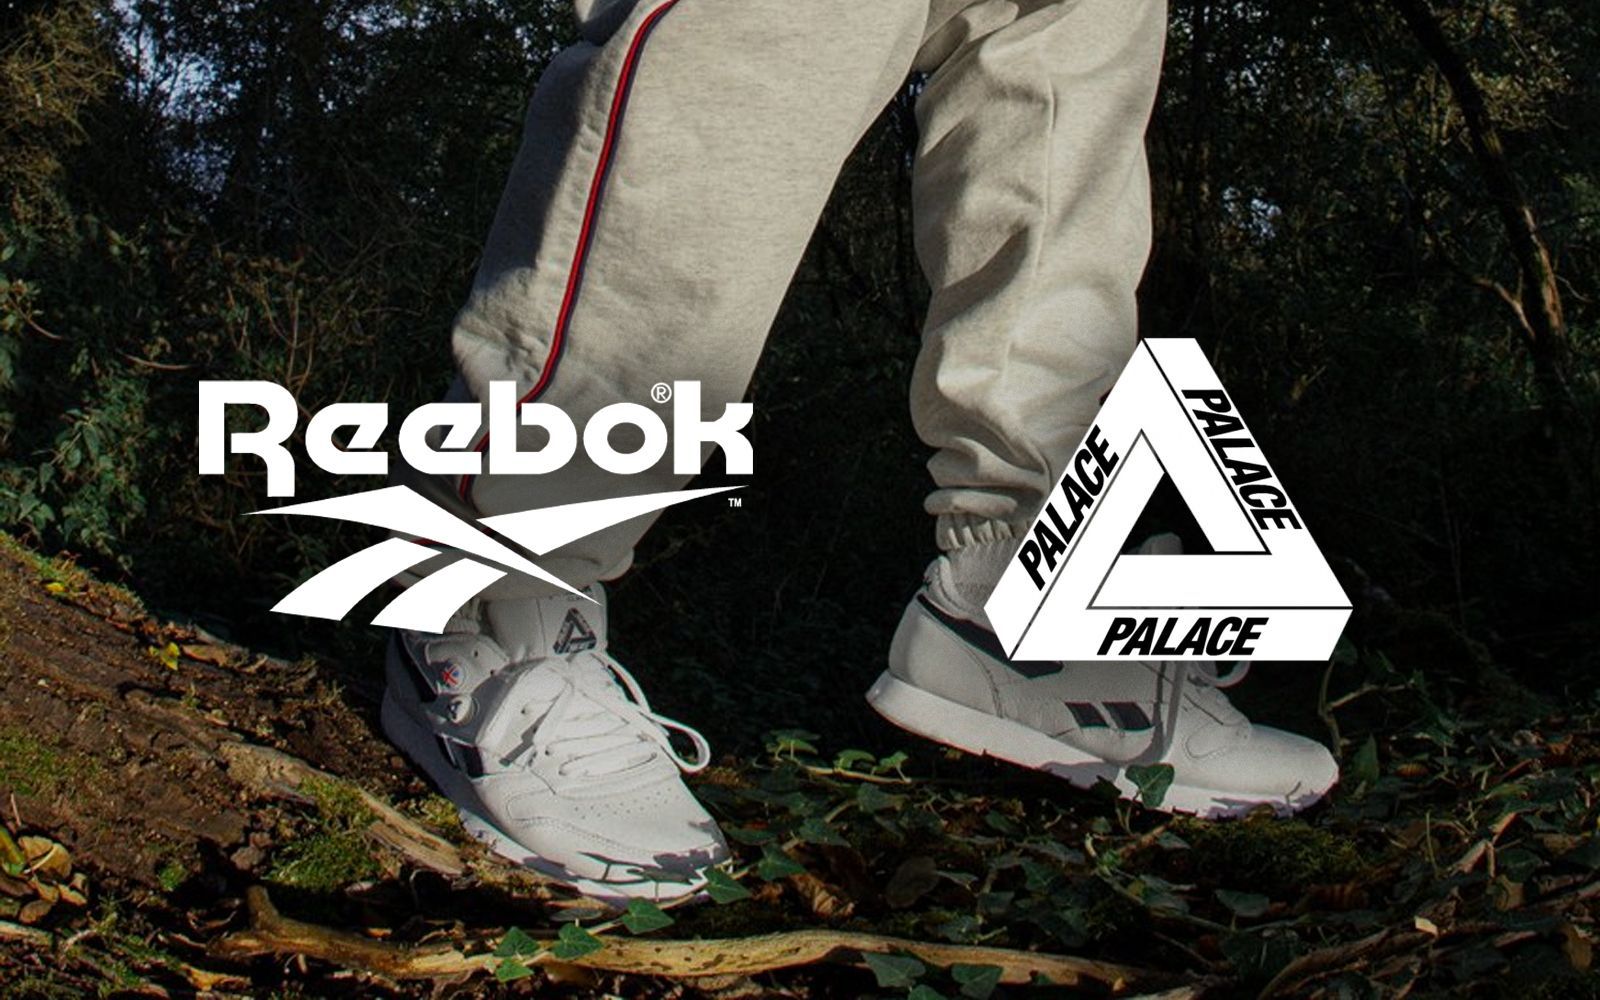 tilgive Forløber status Palace presented the Reebok Classic Leather Pump